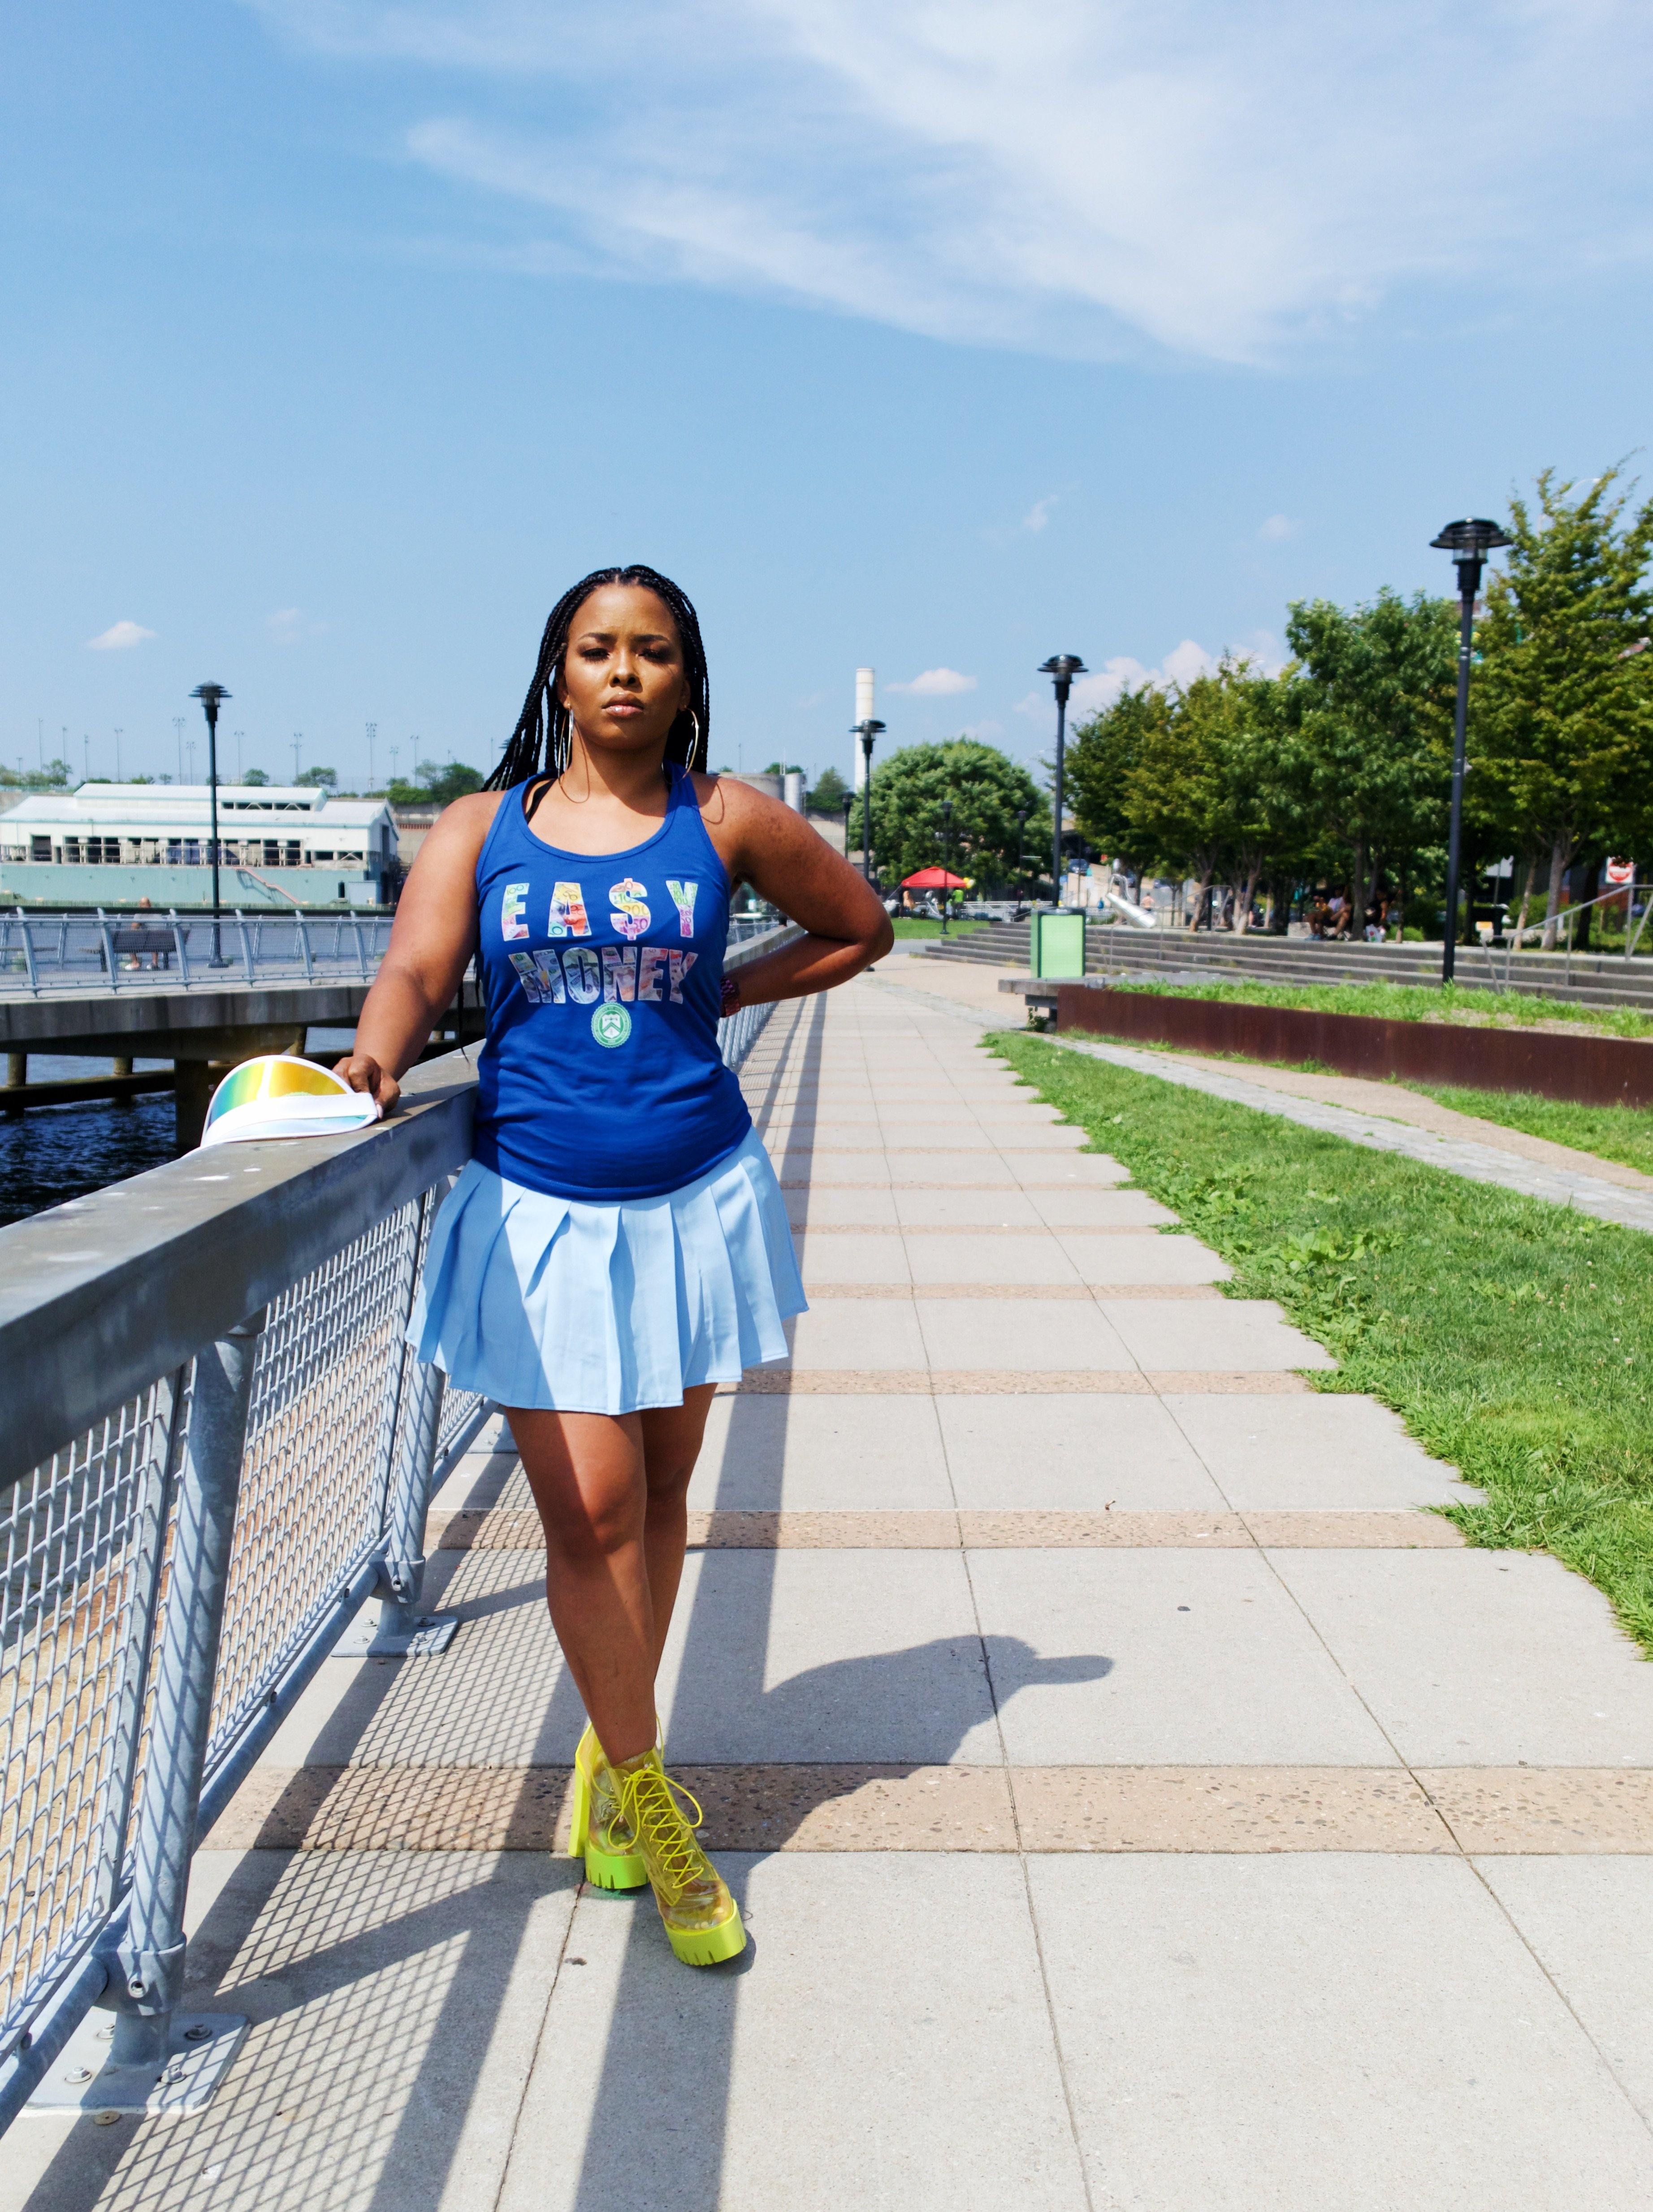 Ladies Racerback EA$Y MONEY Currency T - Royal - Stay Hungry Cloth